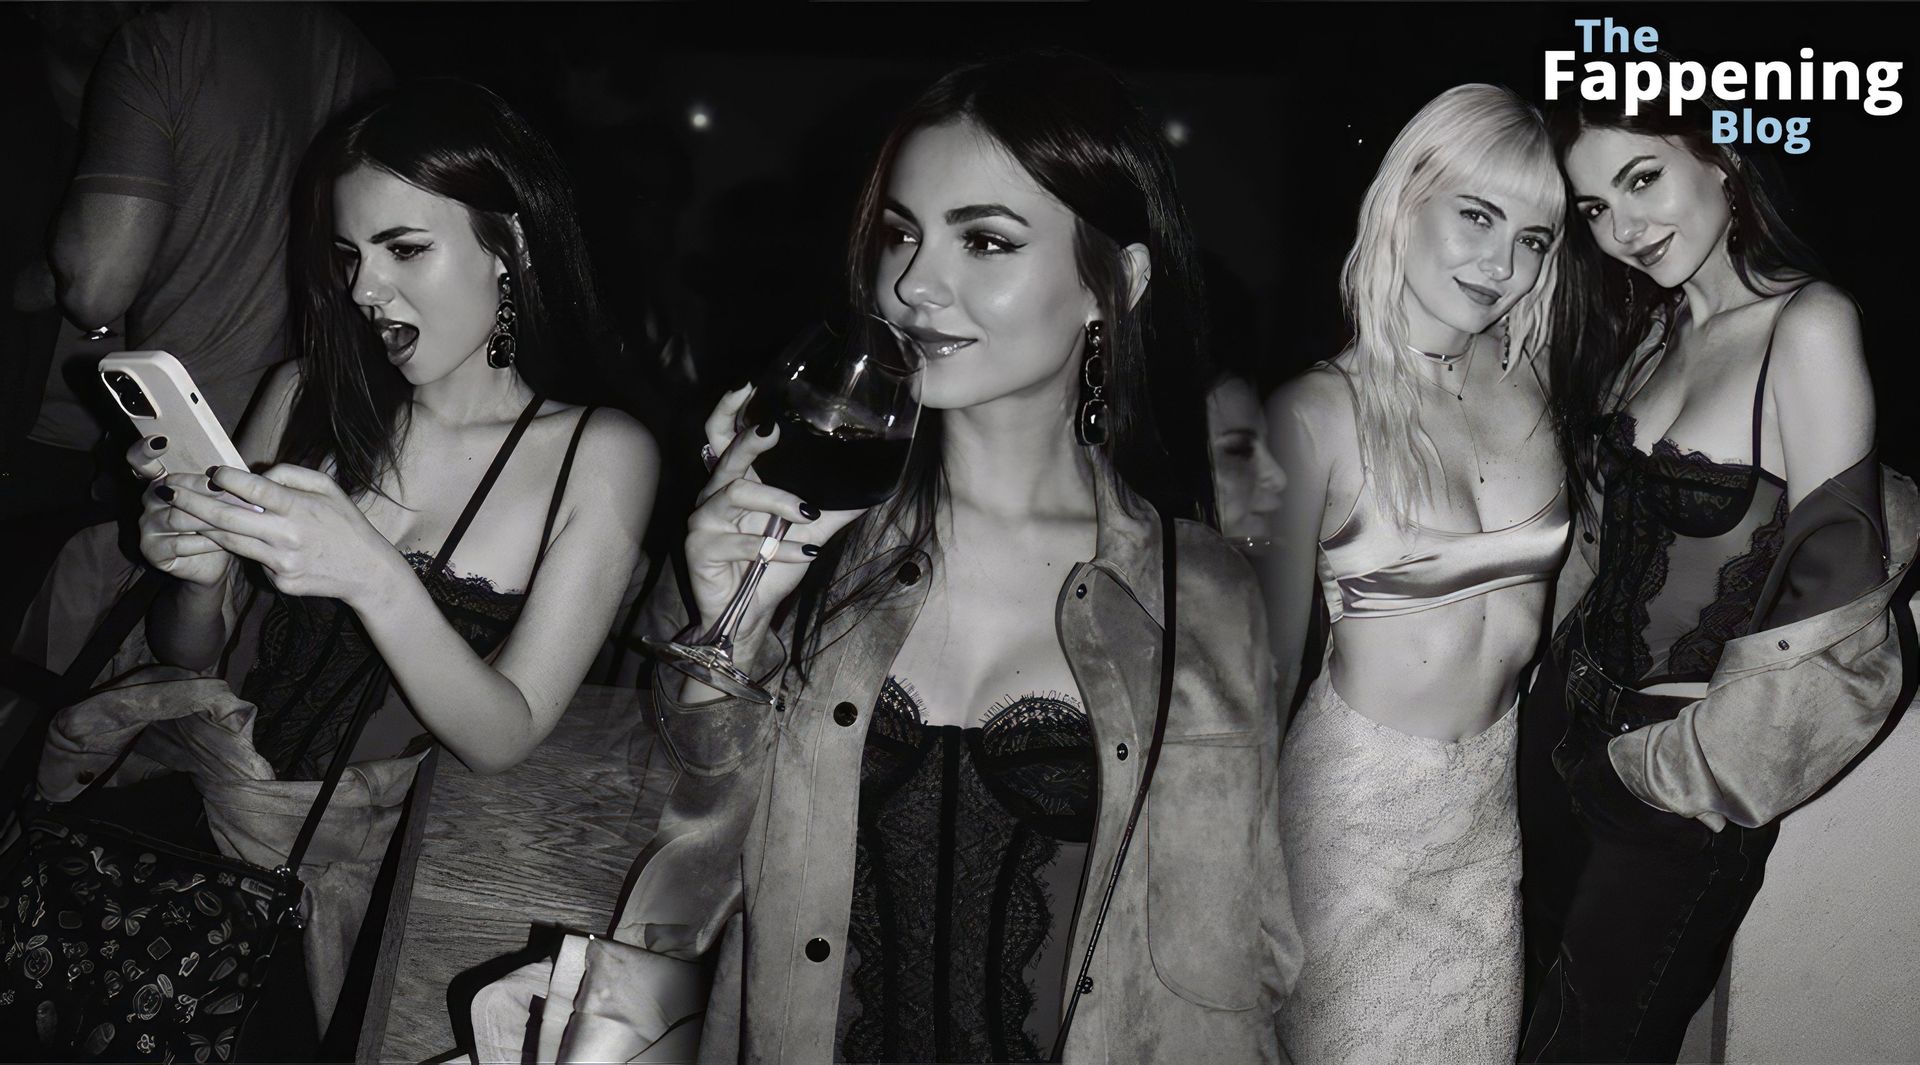 Victoria Justice Looks Sexy at the Party with Friends (15 Photos)